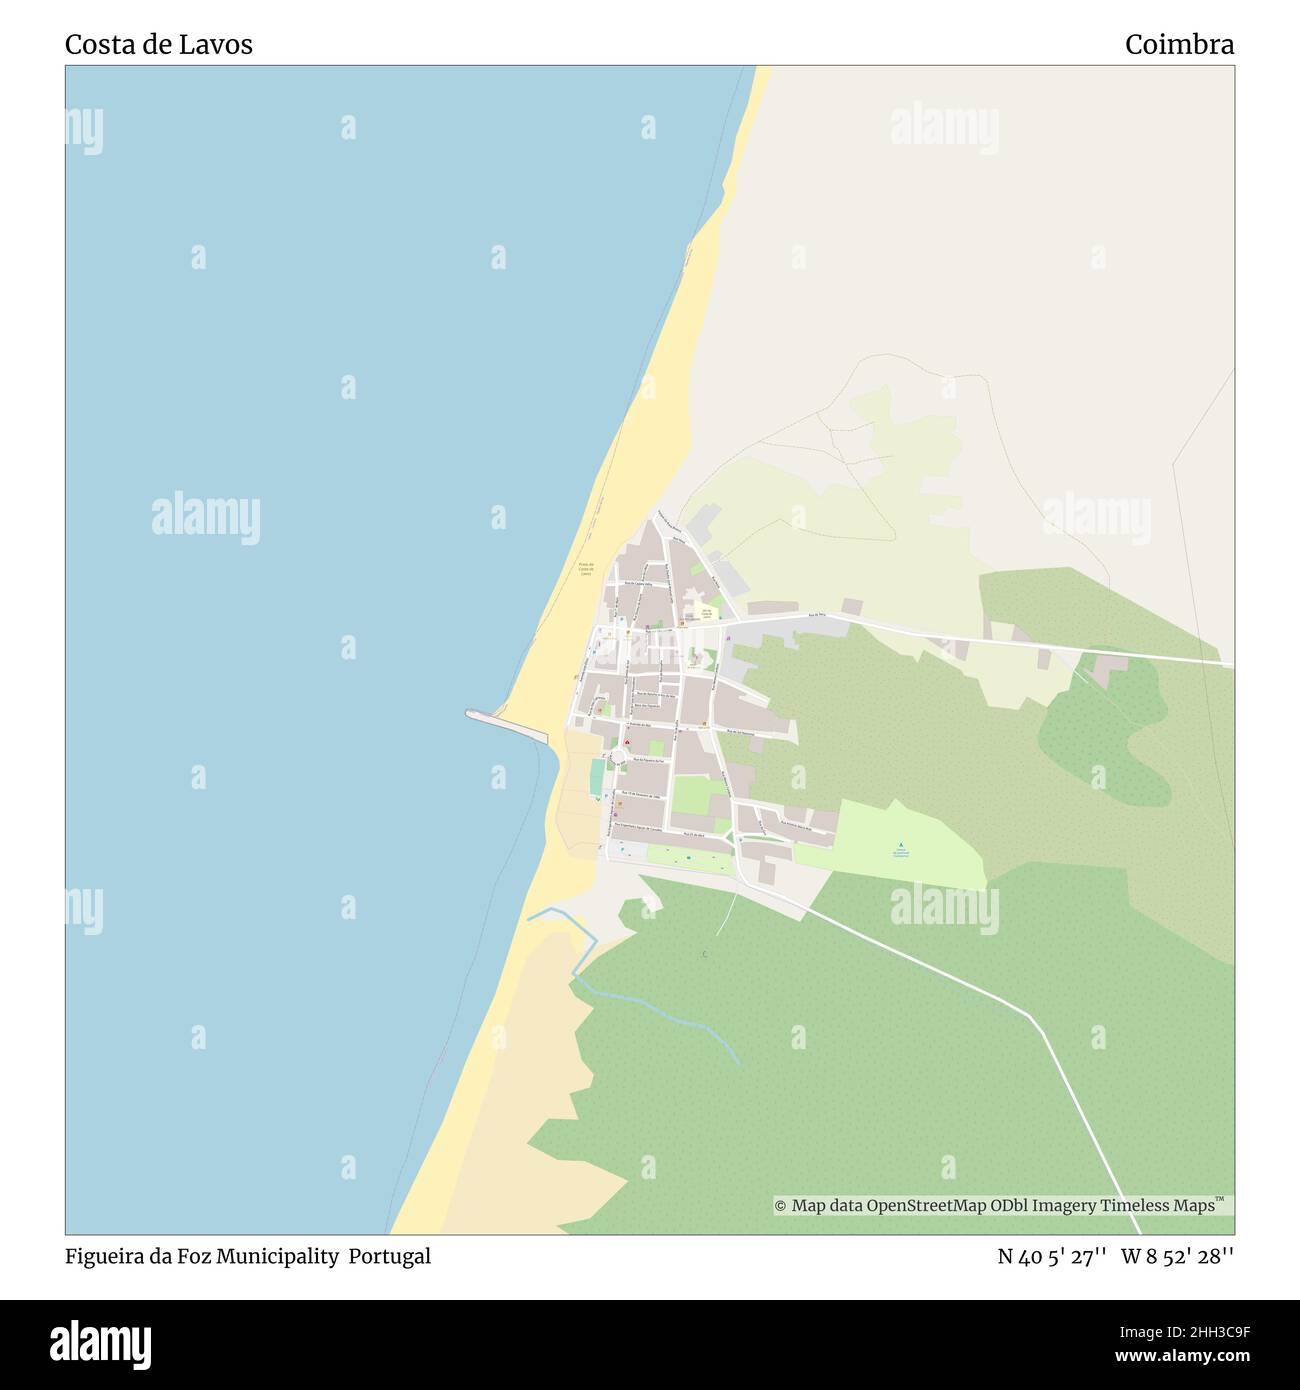 Costa de Lavos, Figueira da Foz Municipality, Portugal, Coimbra, N 40 5'  27'', W 8 52' 28'', map, Timeless Map published in 2021. Travelers,  explorers and adventurers like Florence Nightingale, David Livingstone,